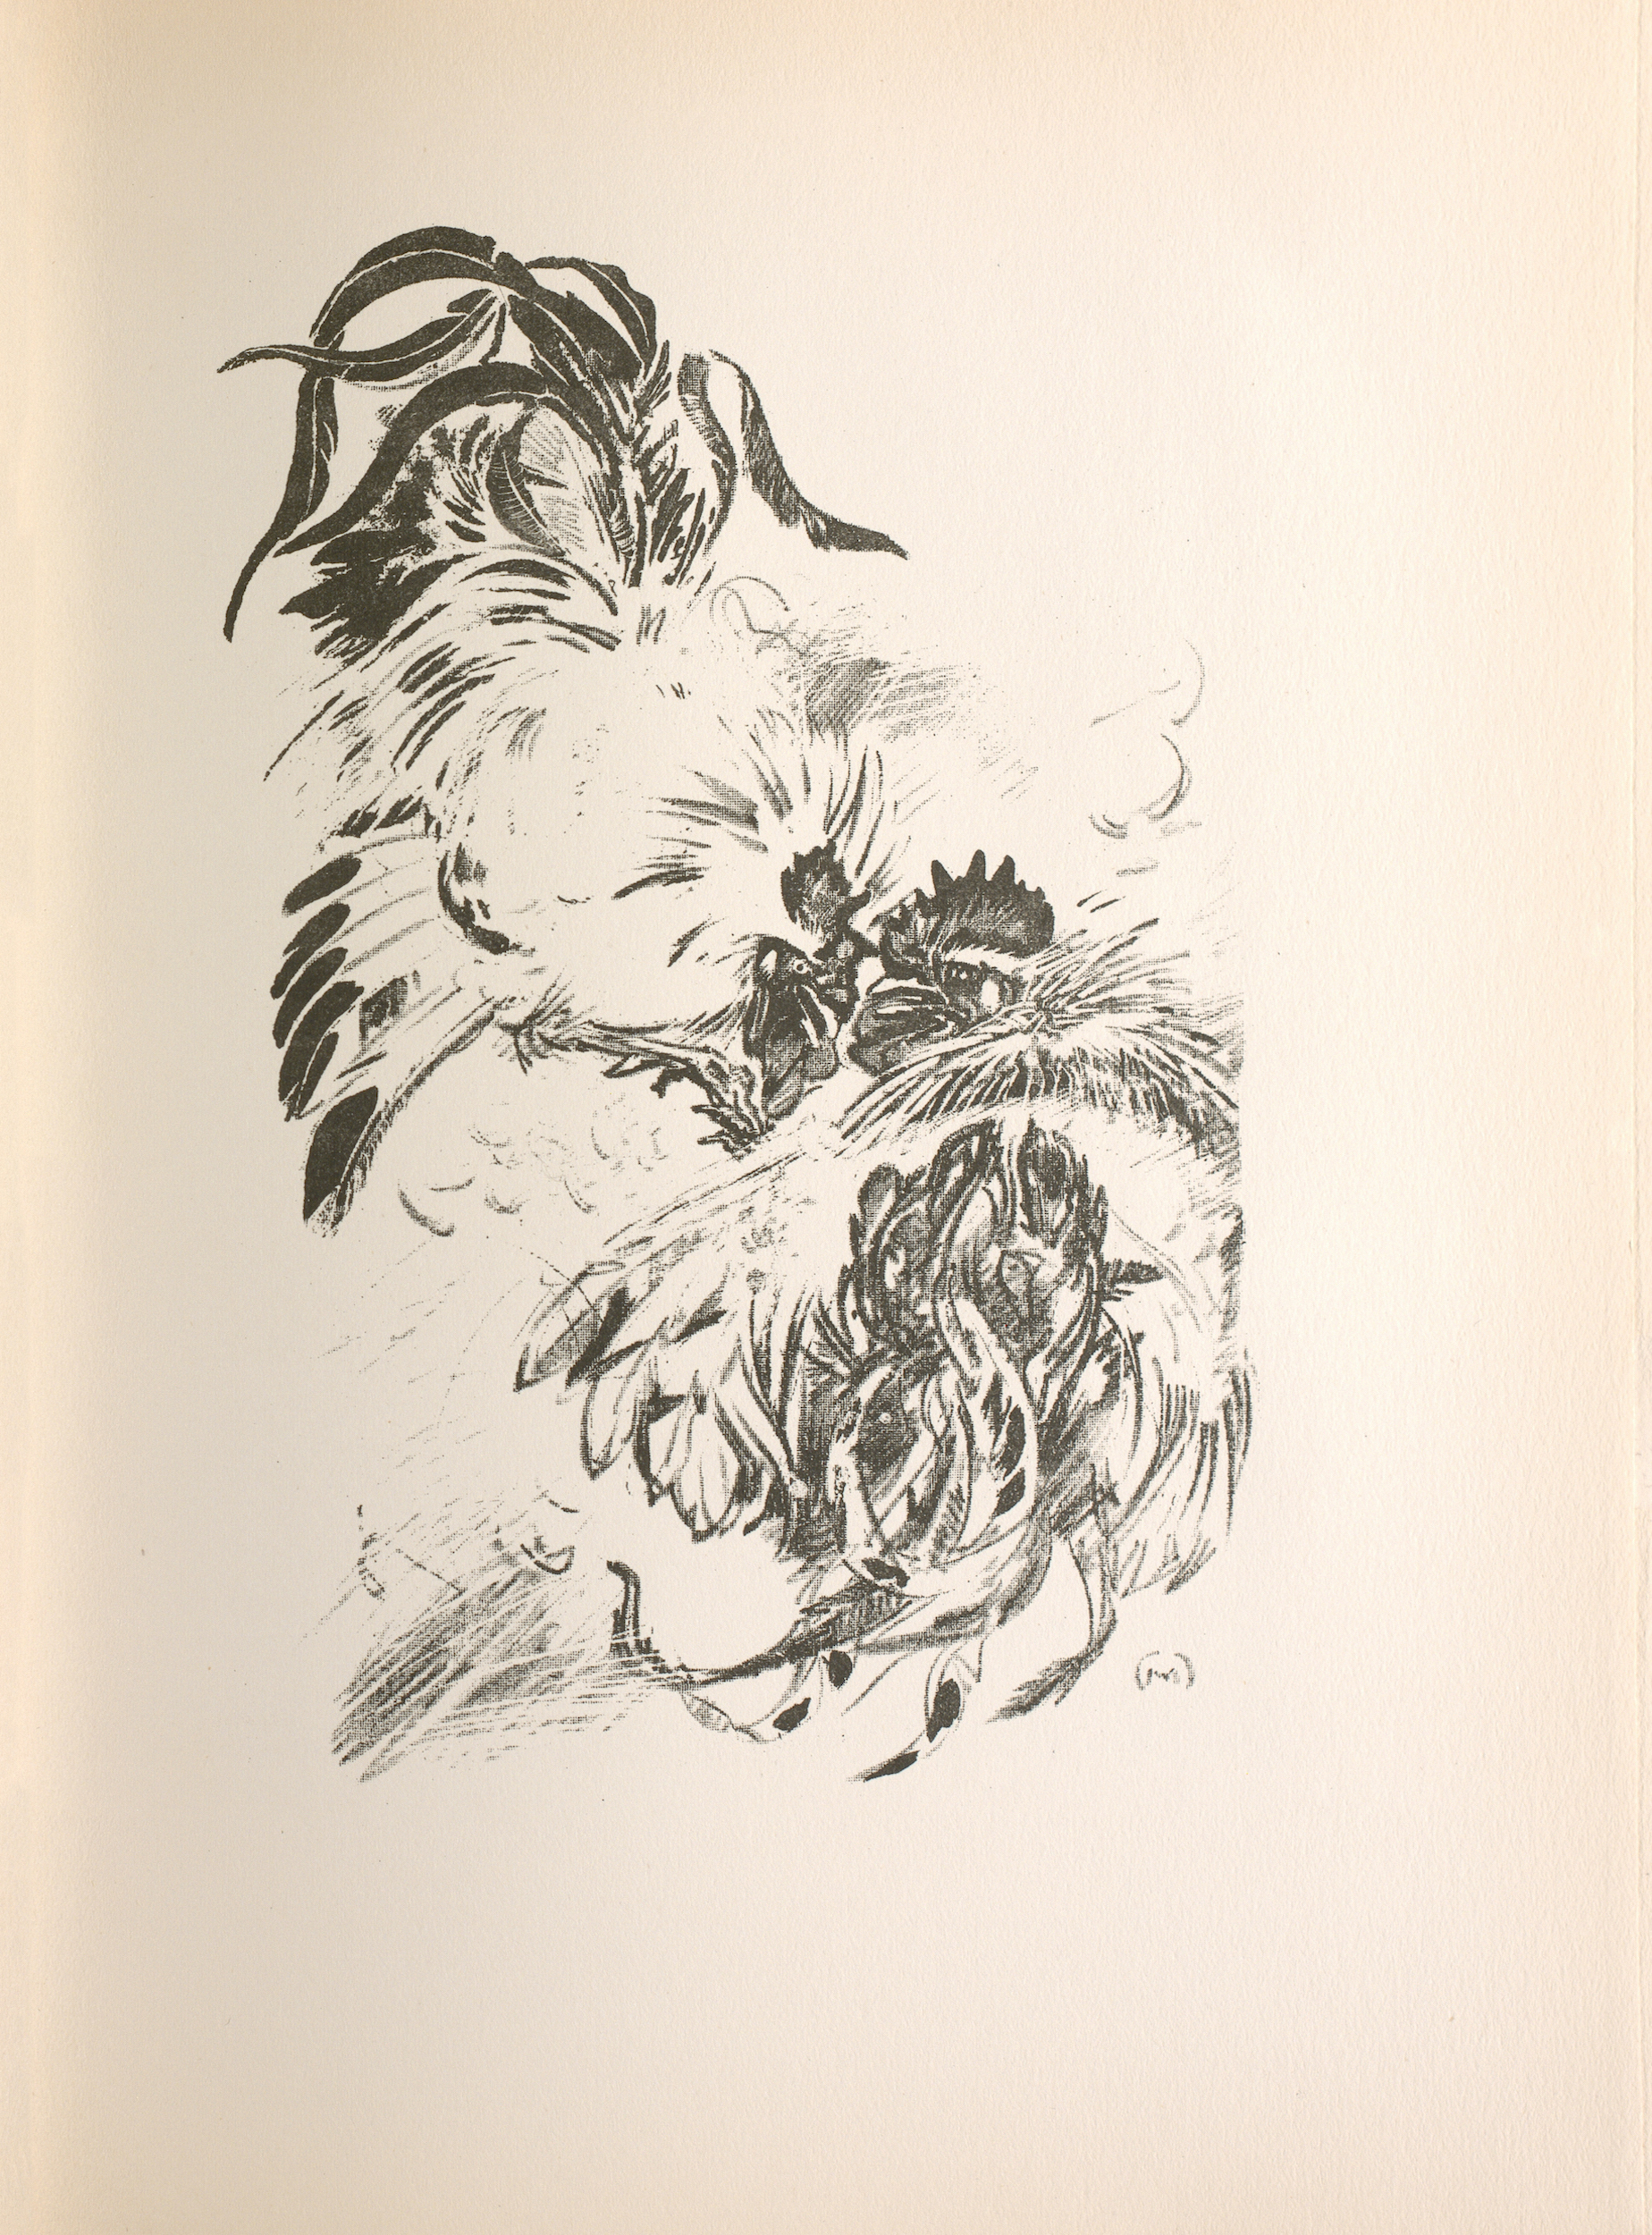 The large black-and-white image is in portrait orientation, printed directly on the center of the page. Dark curved lines convey a moving scene in which two birds are fighting. The two birds are not distinctly depicted, but appear in a swirl of feathers. The foremost rooster has its back to the viewer, and the topmost rooster faces the viewer. The heads and beaks of the two fighting birds meet in the center of the image. The artist’s monogram, an encircled “M,” appears in the bottom right corner of the image.